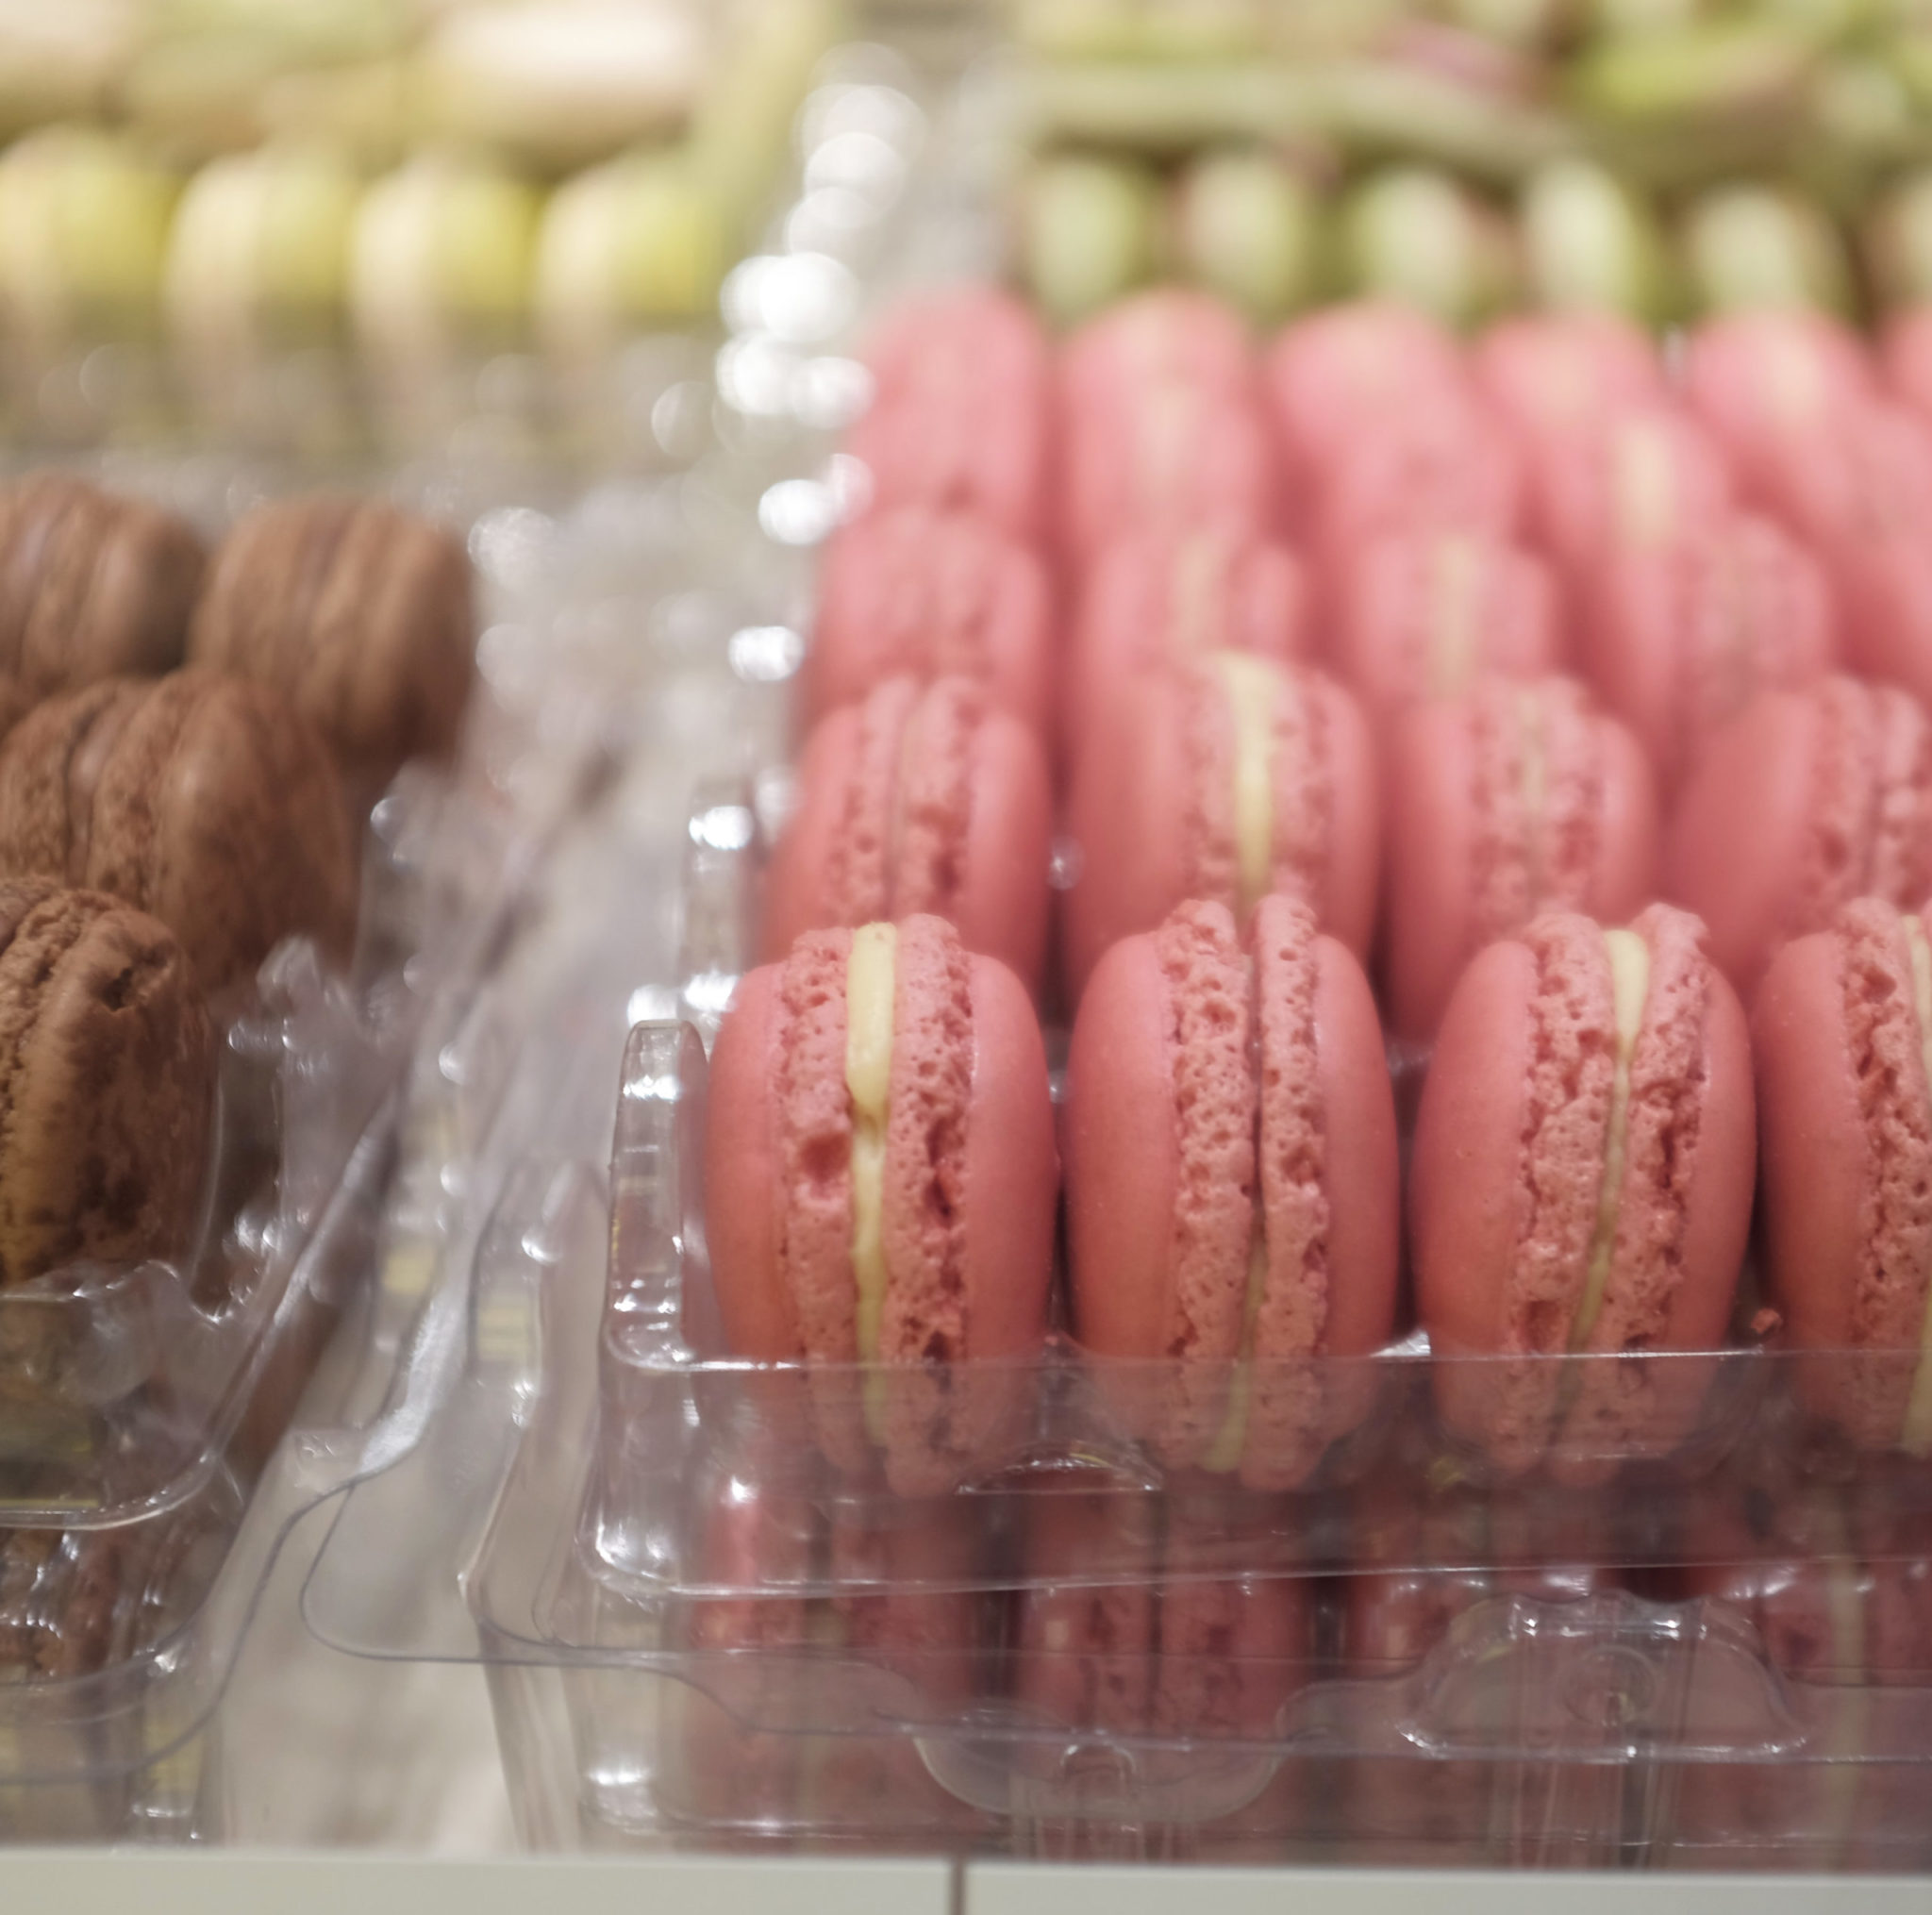 Paris – a patisserie and chocolate tour